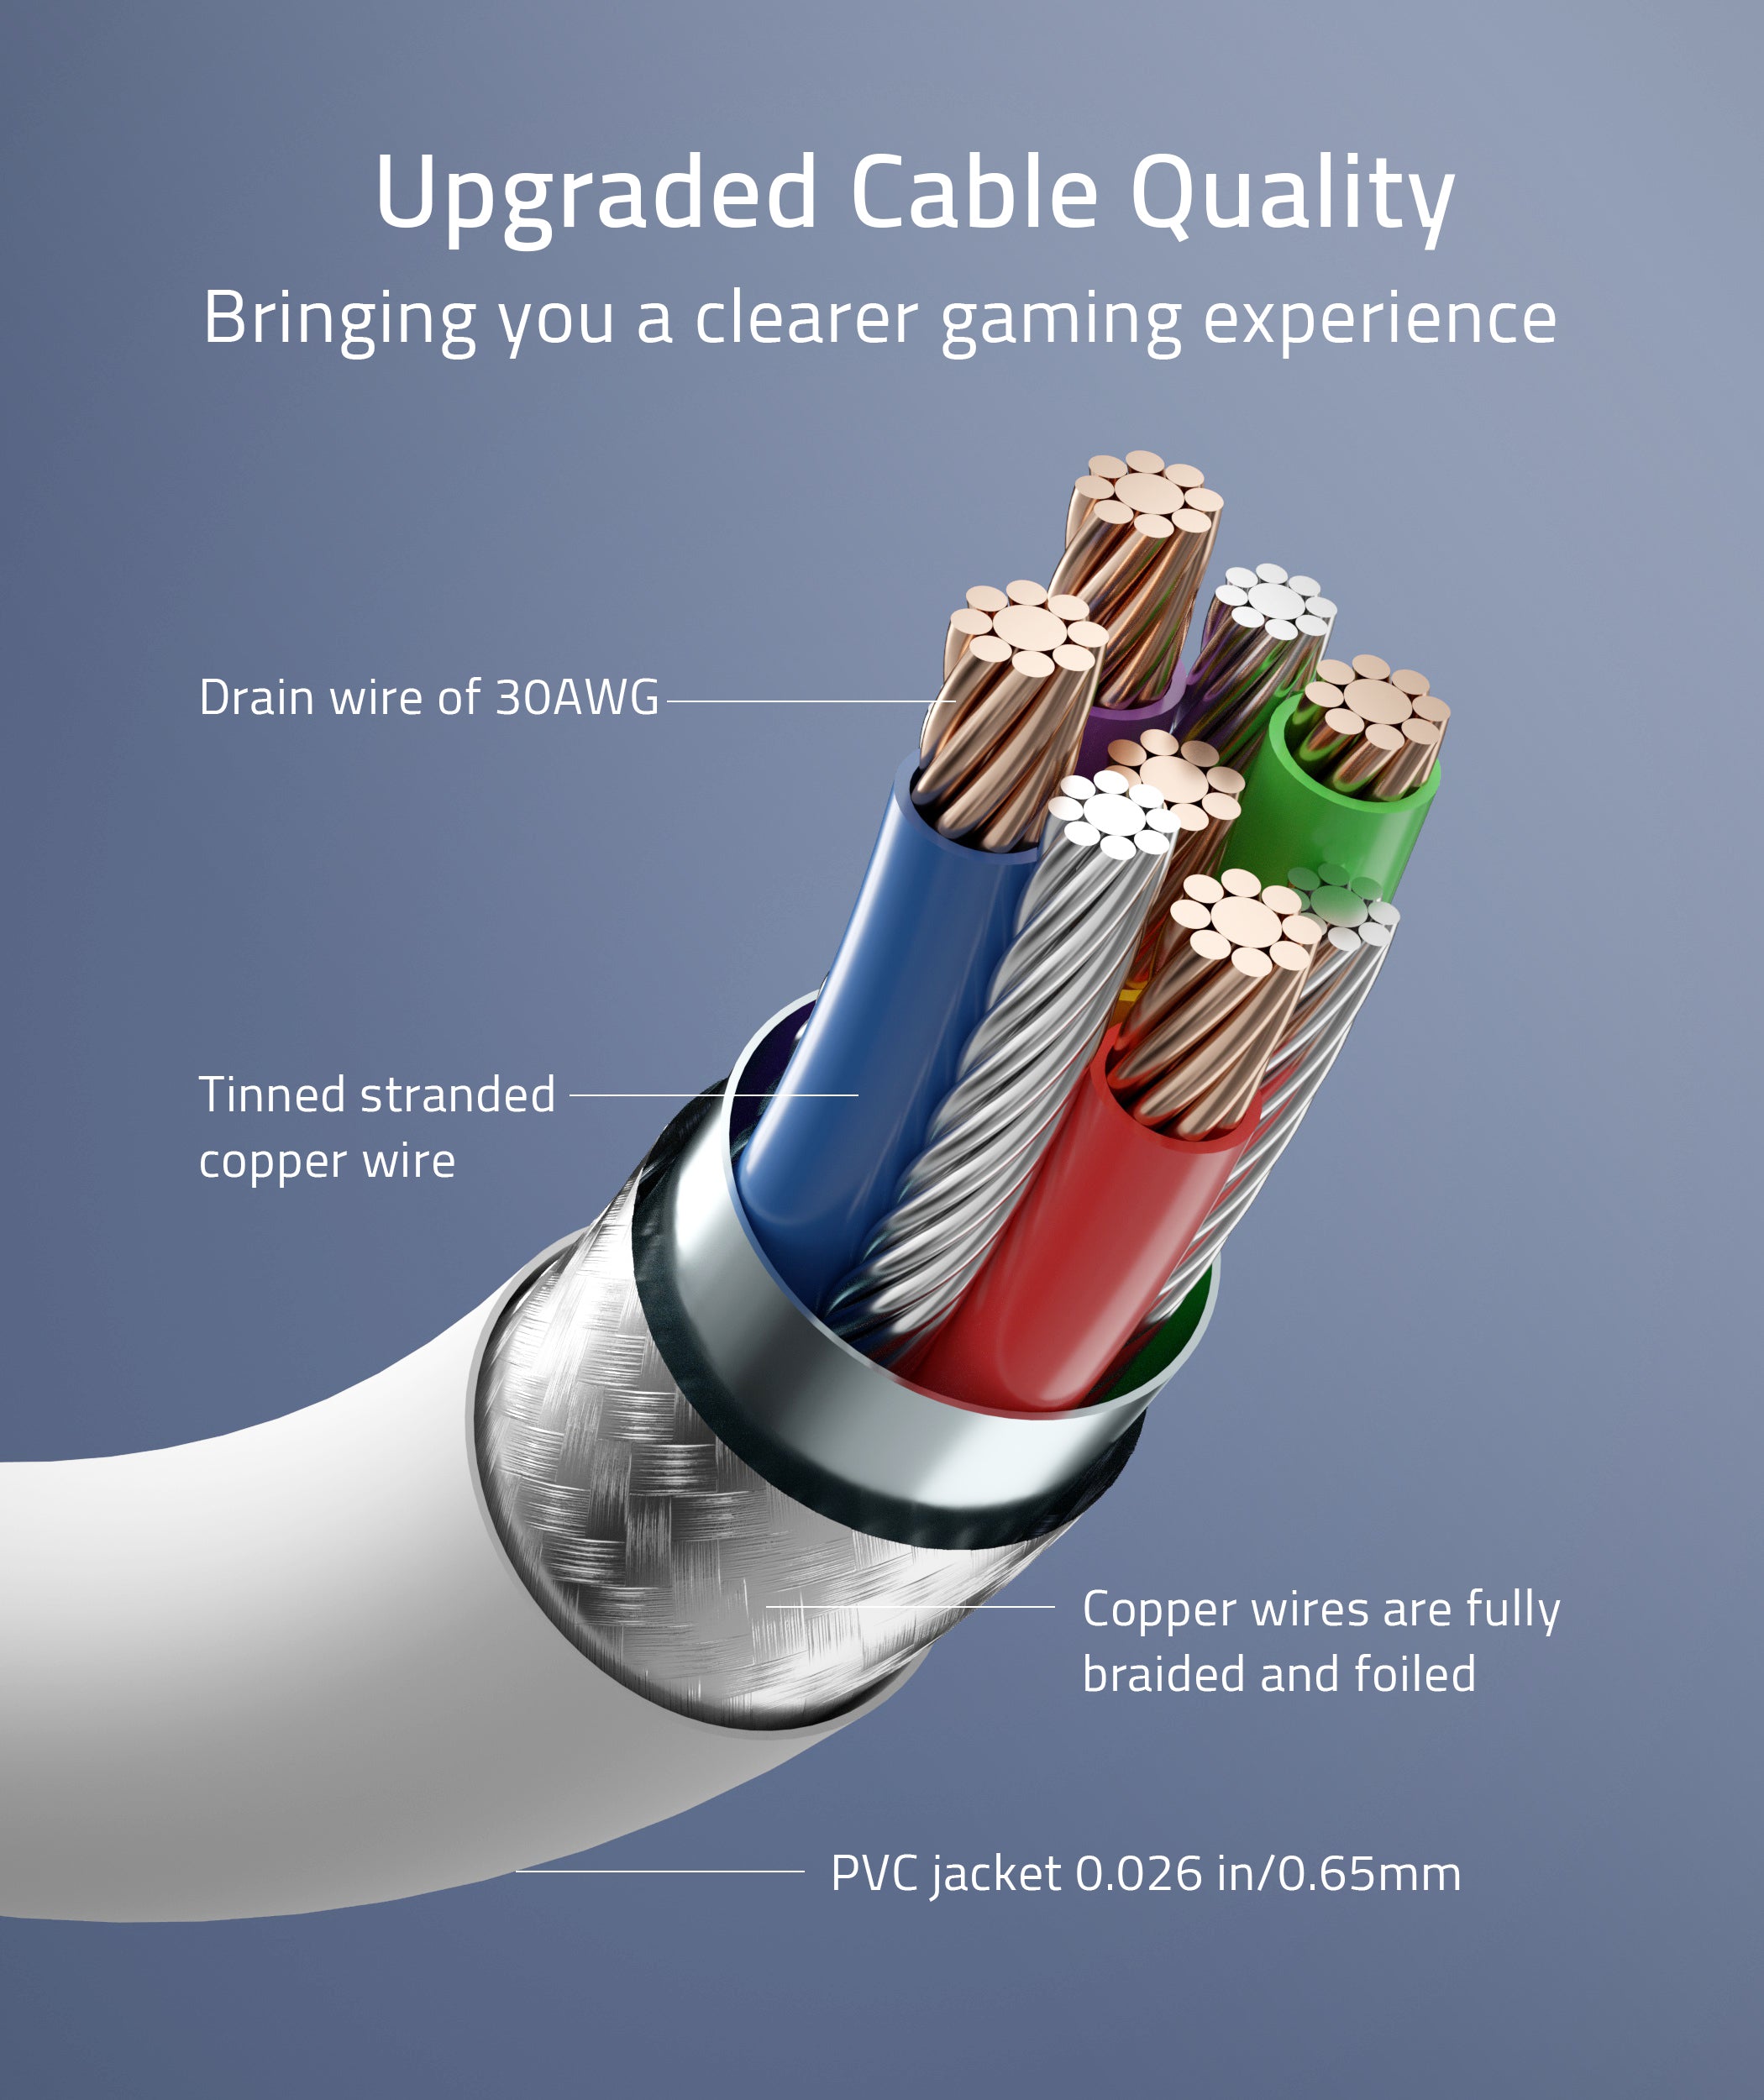 upgraded cable quality